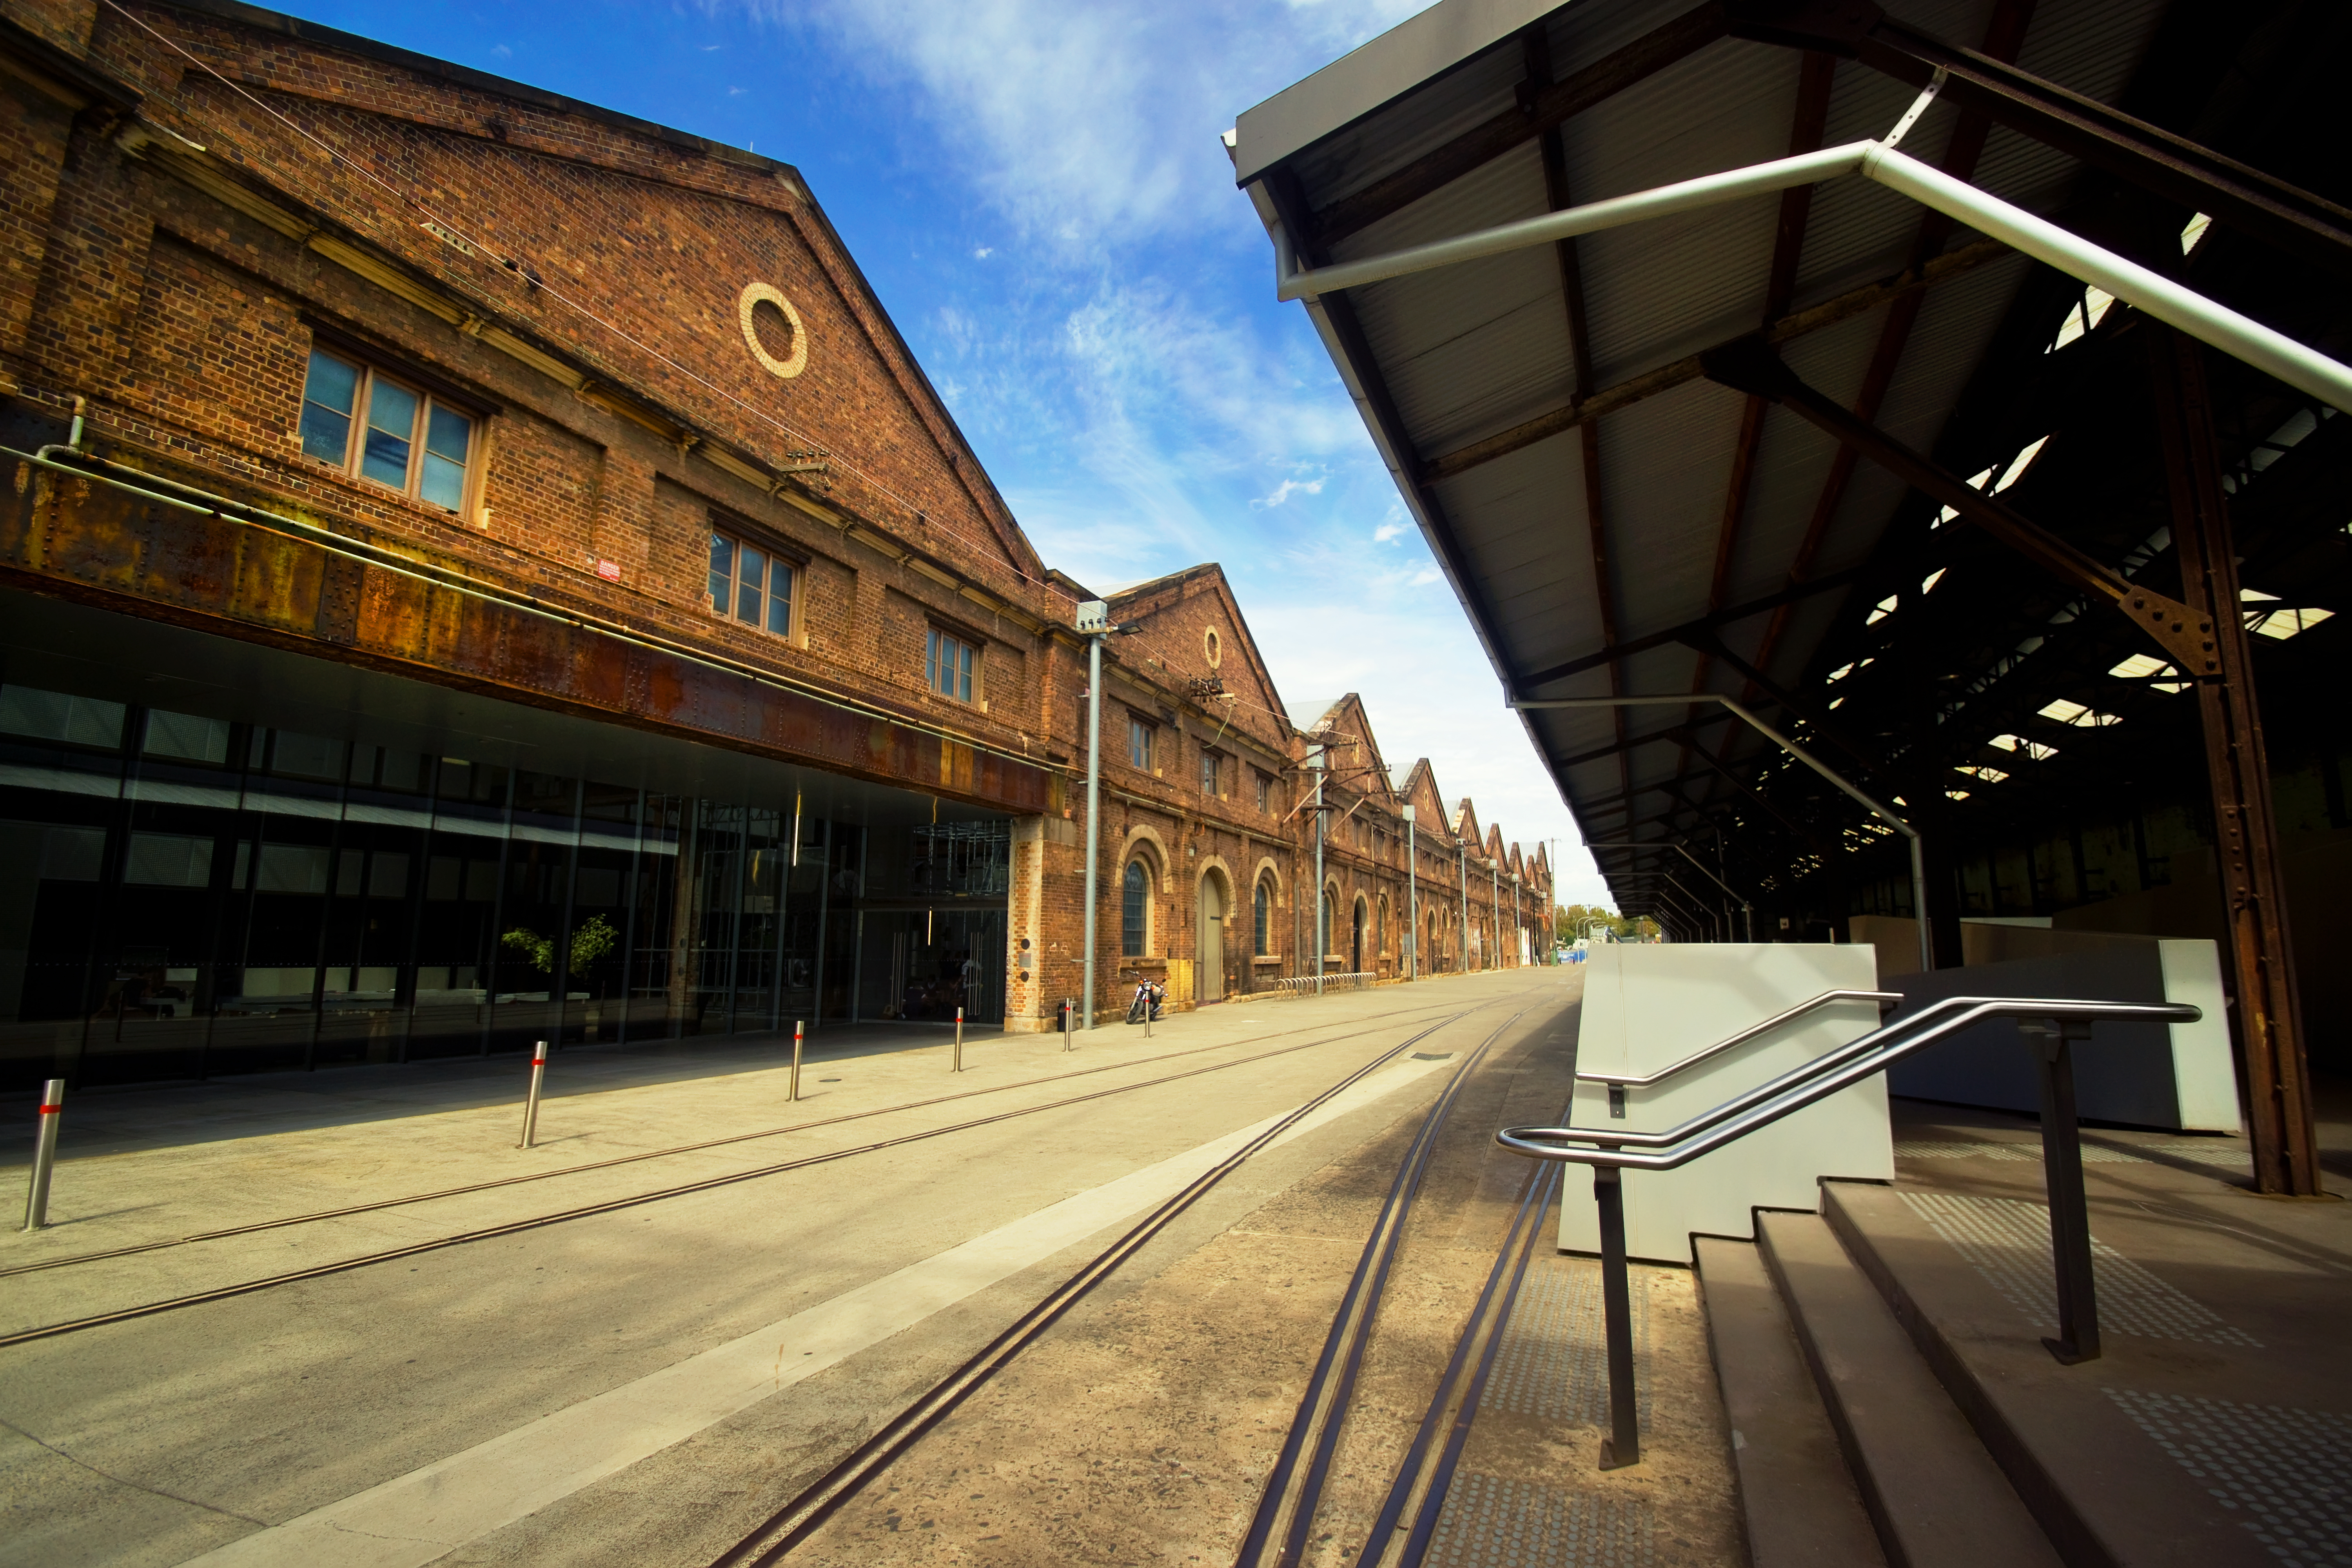 Sydney’s Beloved Arts Precinct Carriageworks Has Gone Into Voluntary Administration